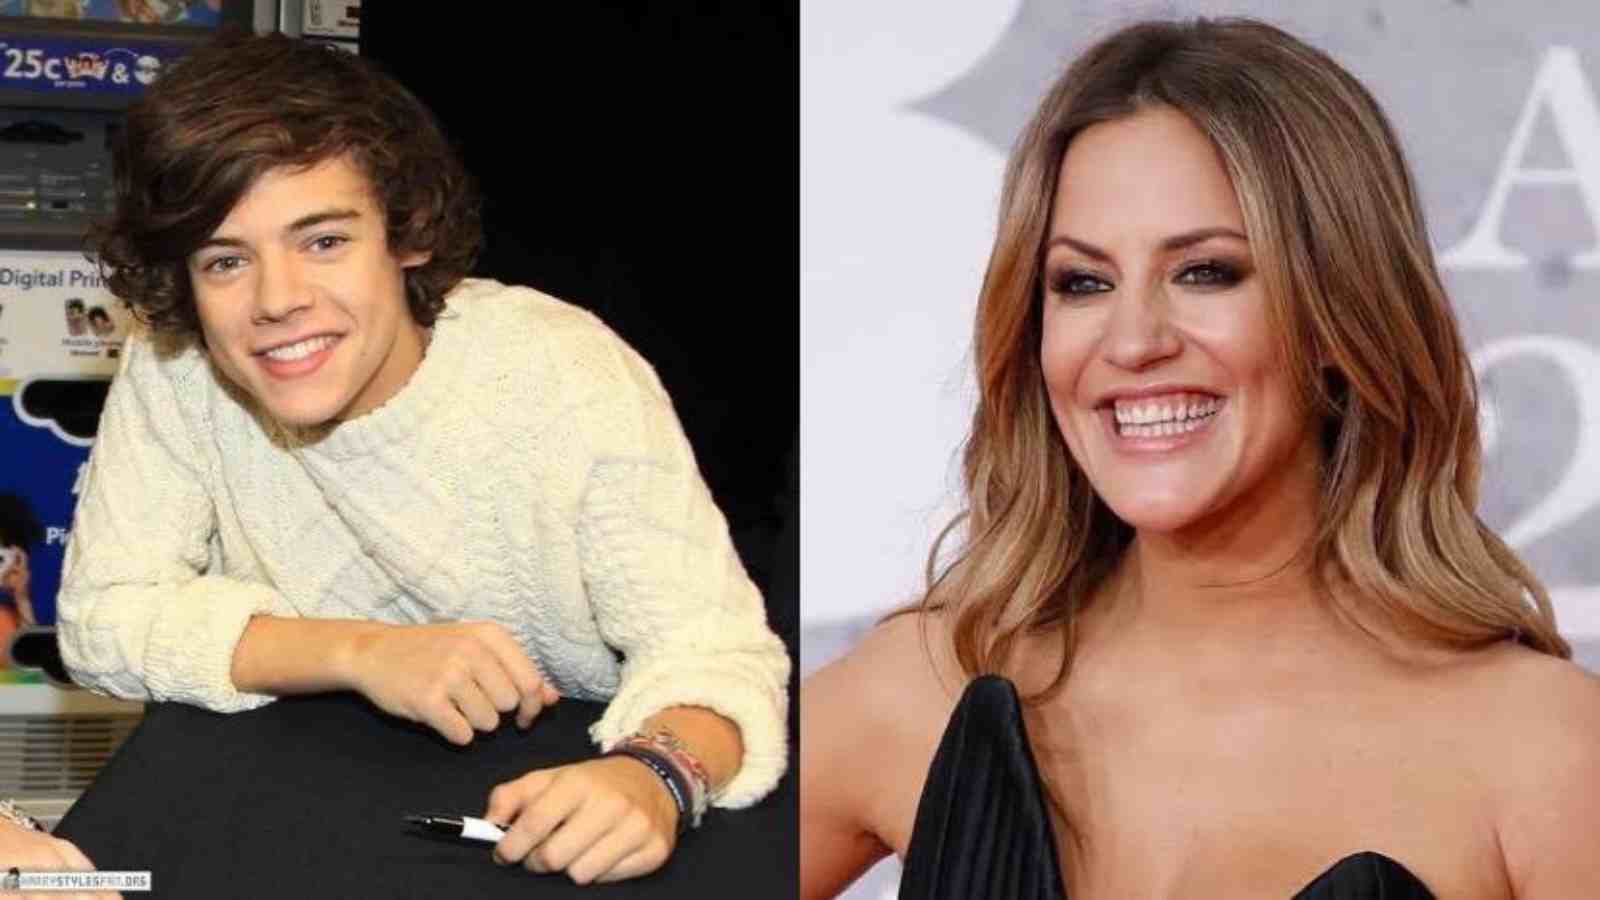 Caroline Flack was called a pedophile for dating Harry Styles